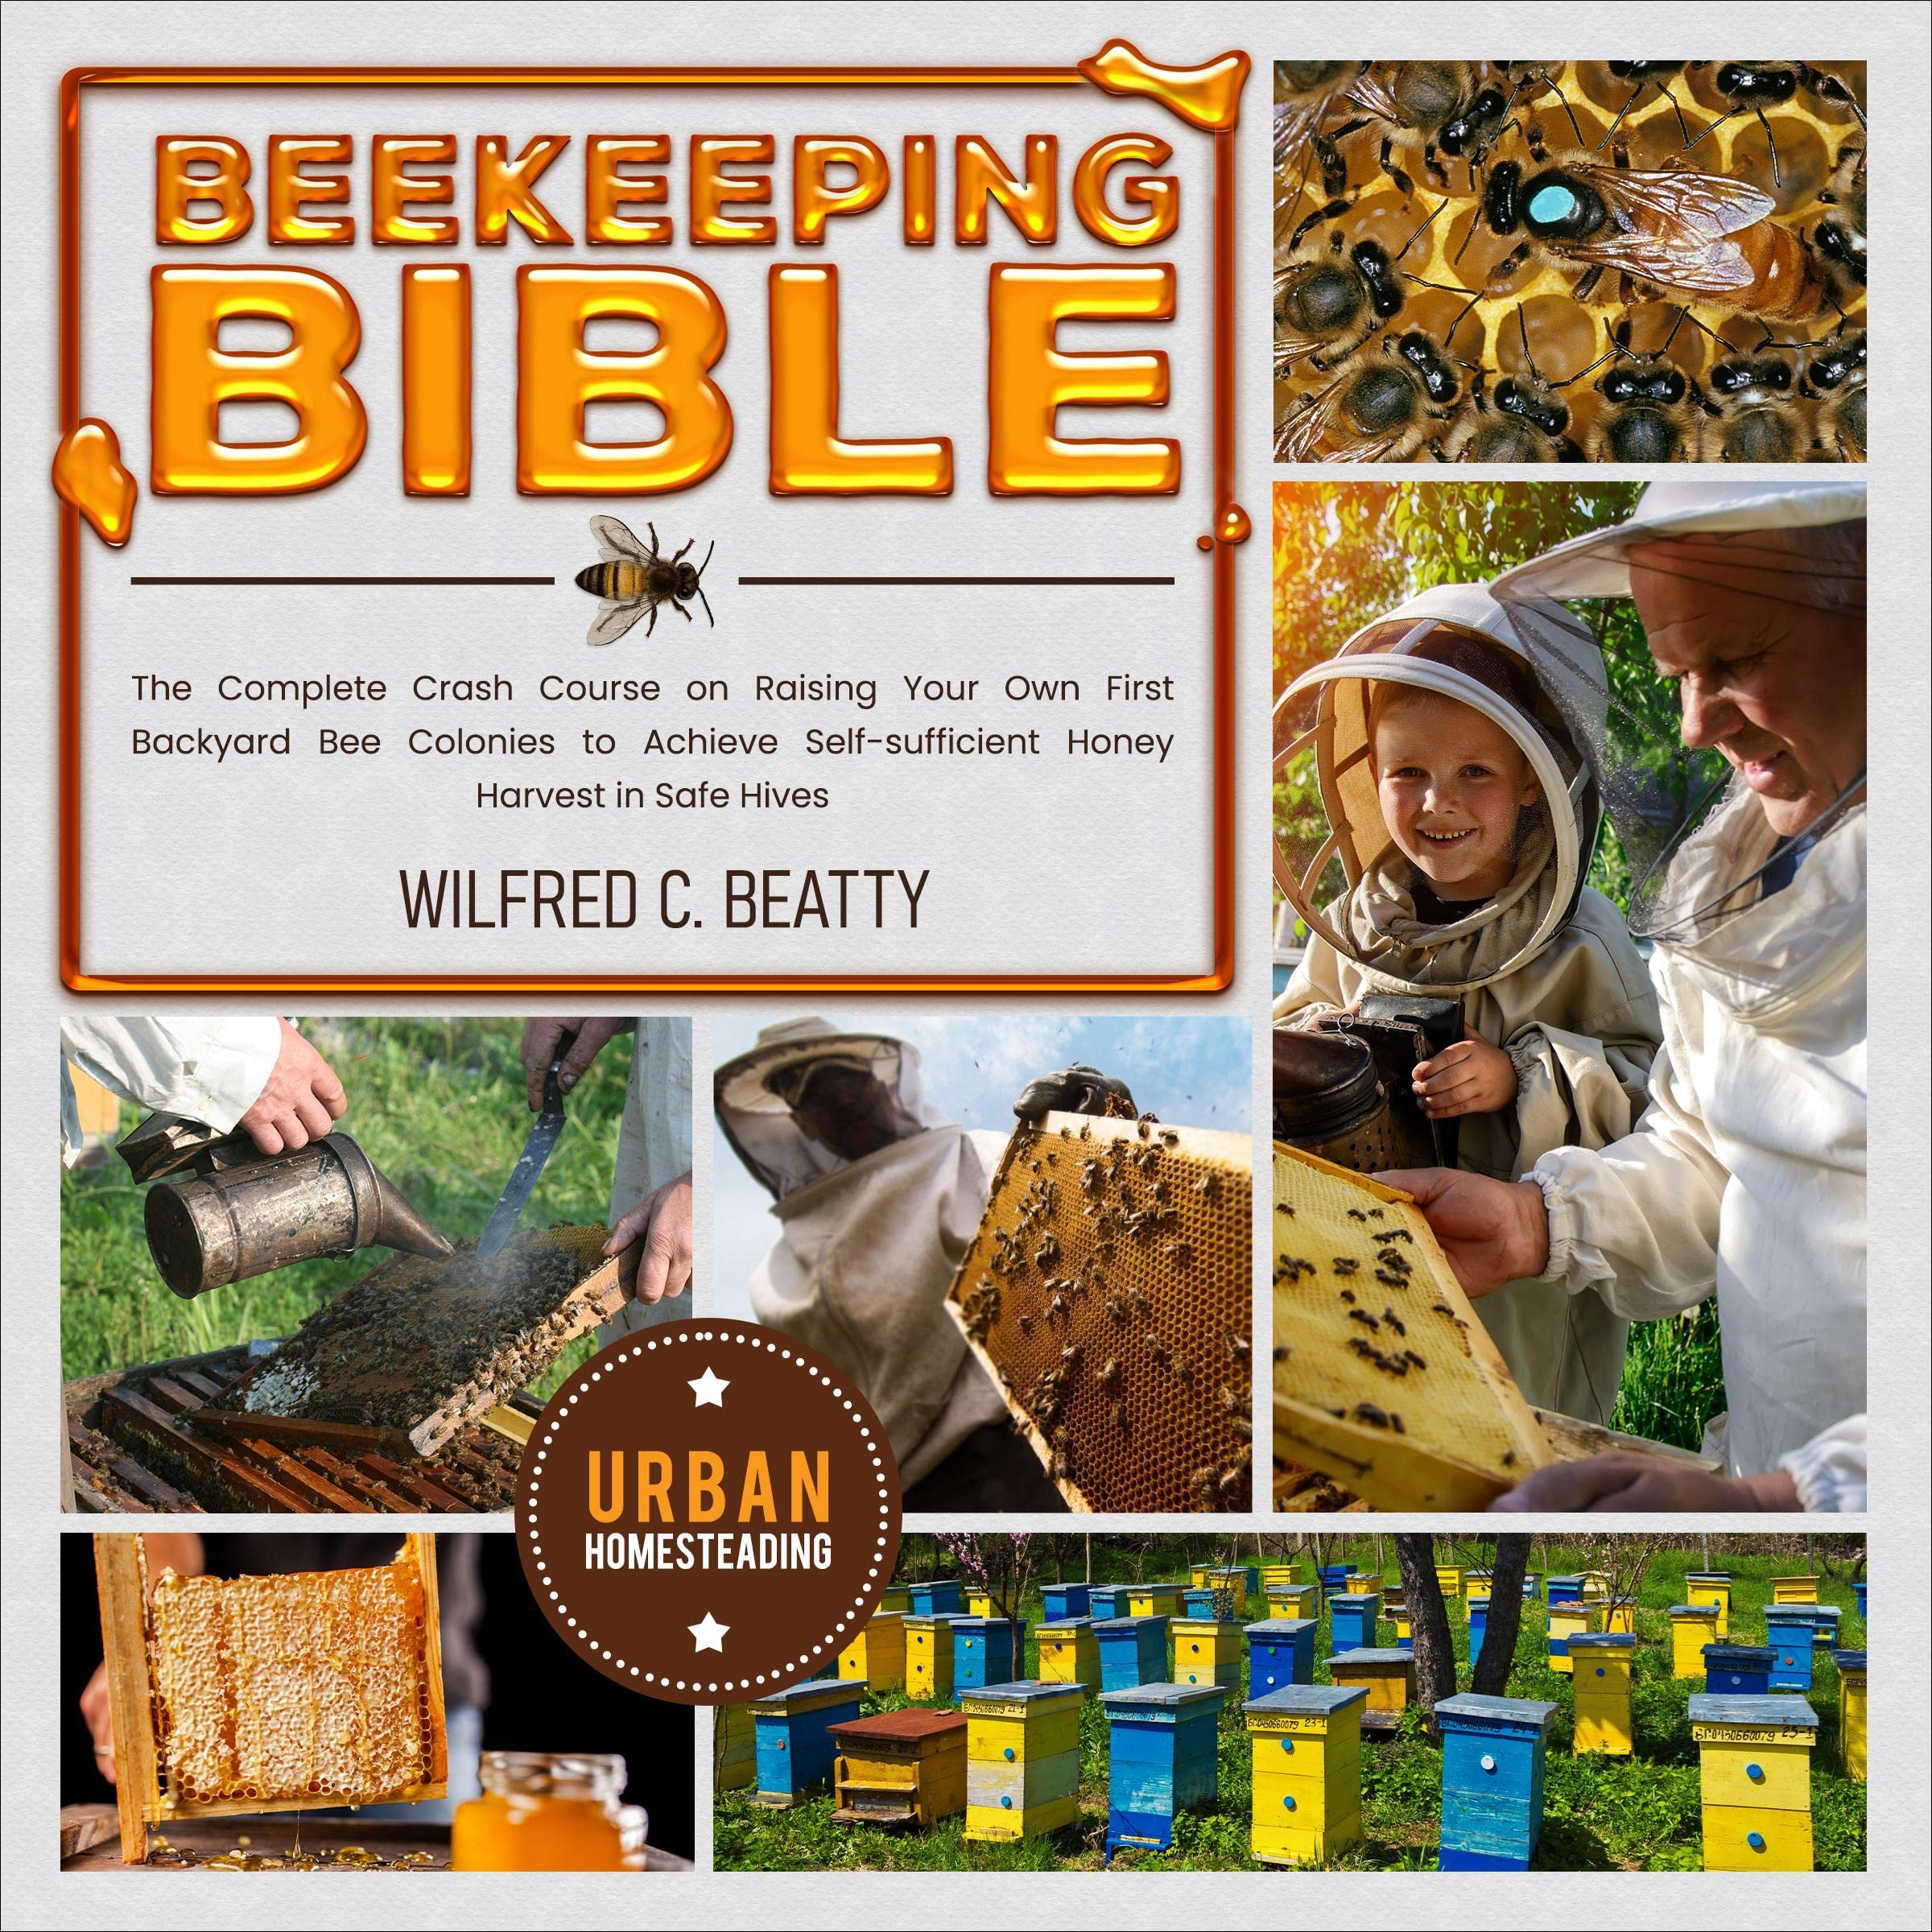 Beekeeping Bible: The Complete Crash Course on Raising Your Own First Backyard Bee Colonies to Achieve Self-Sufficient Honey Harvest in Safe Hives (off-Grid Survival Urban Homesteading)